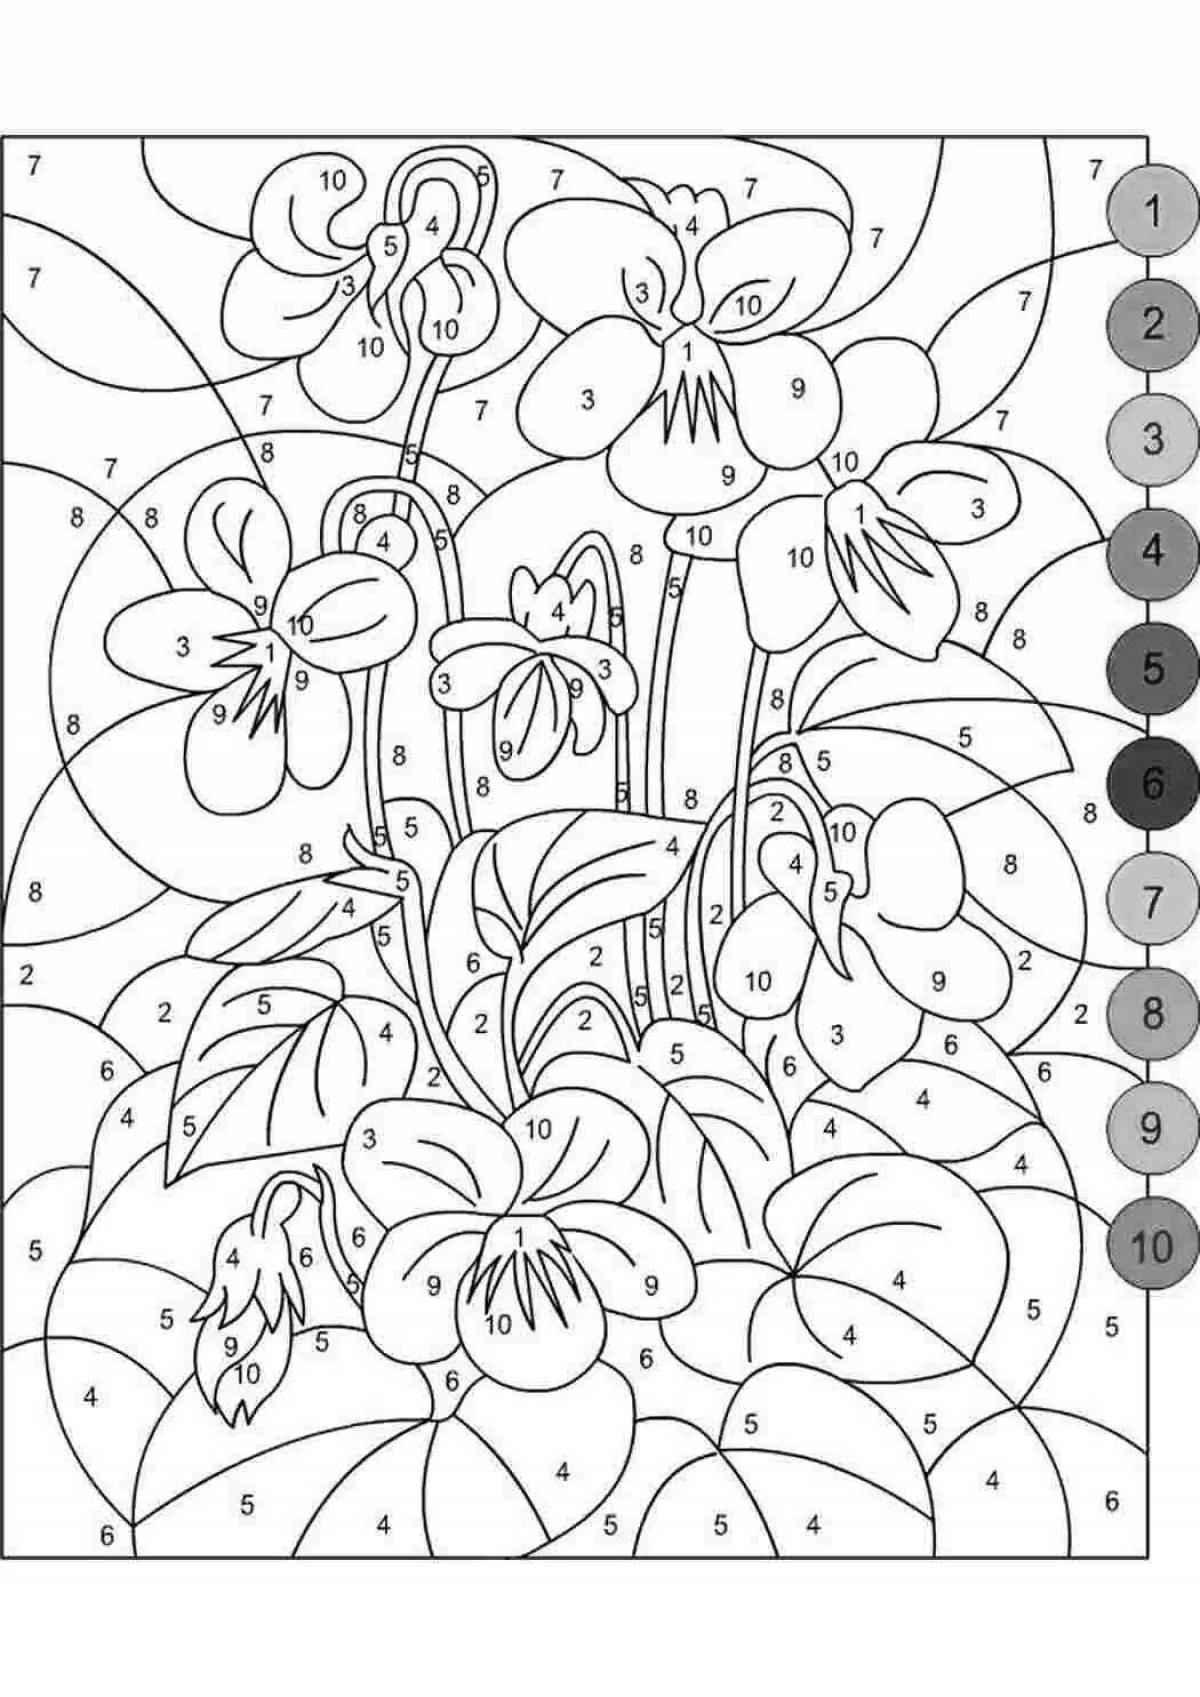 Playful coloring by number pdf